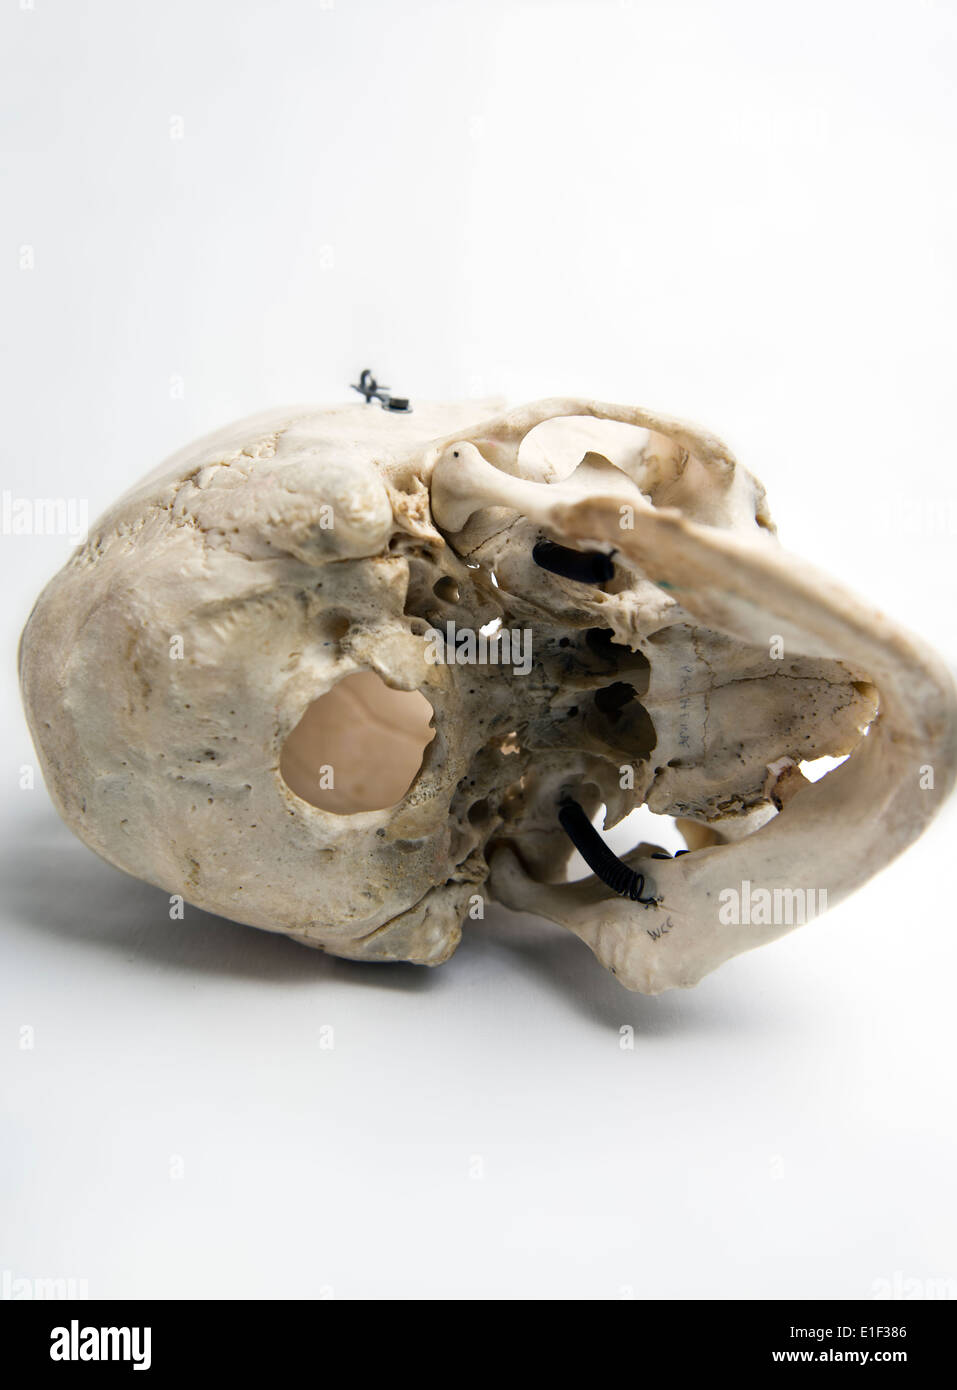 Genuine Human Skull with springs on jaws used for Medical Studies Stock Photo